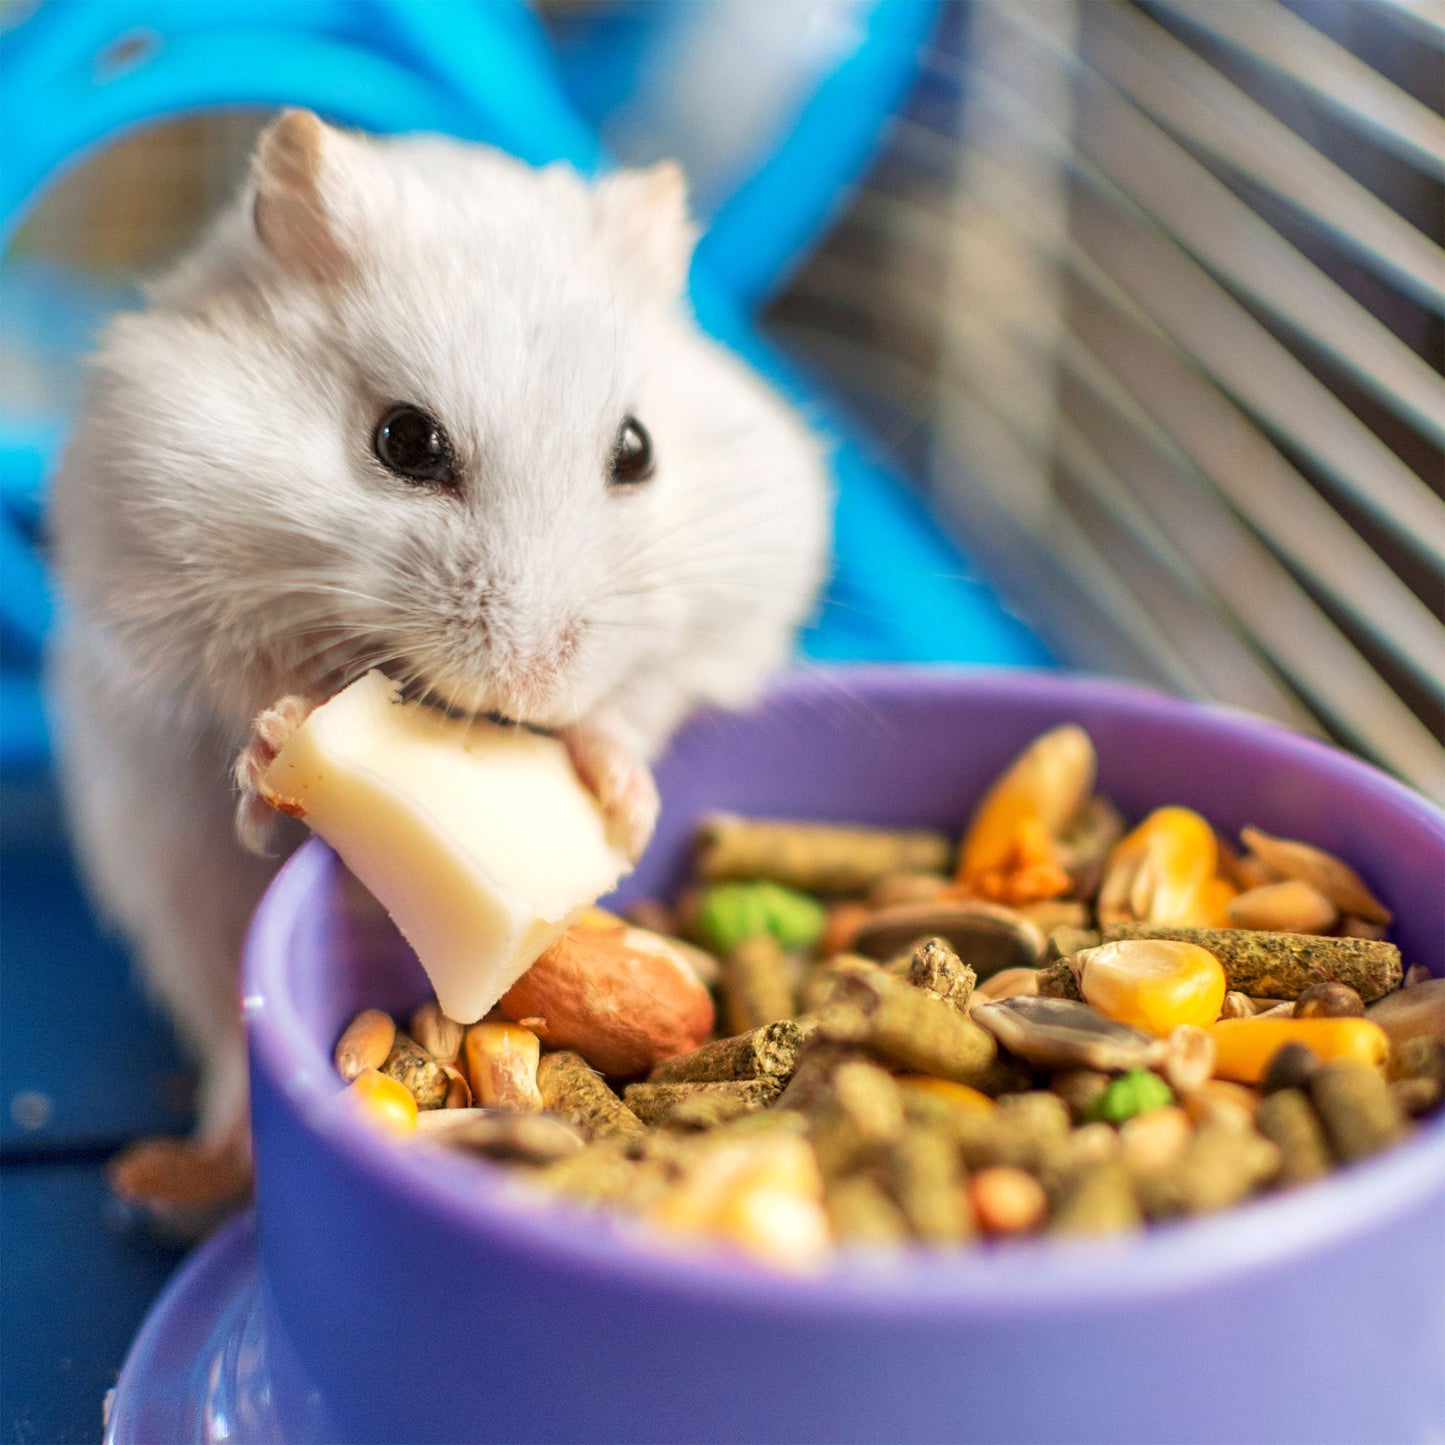 Send Supplies to Hamsters, Guinea Pigs and Other Small Animals